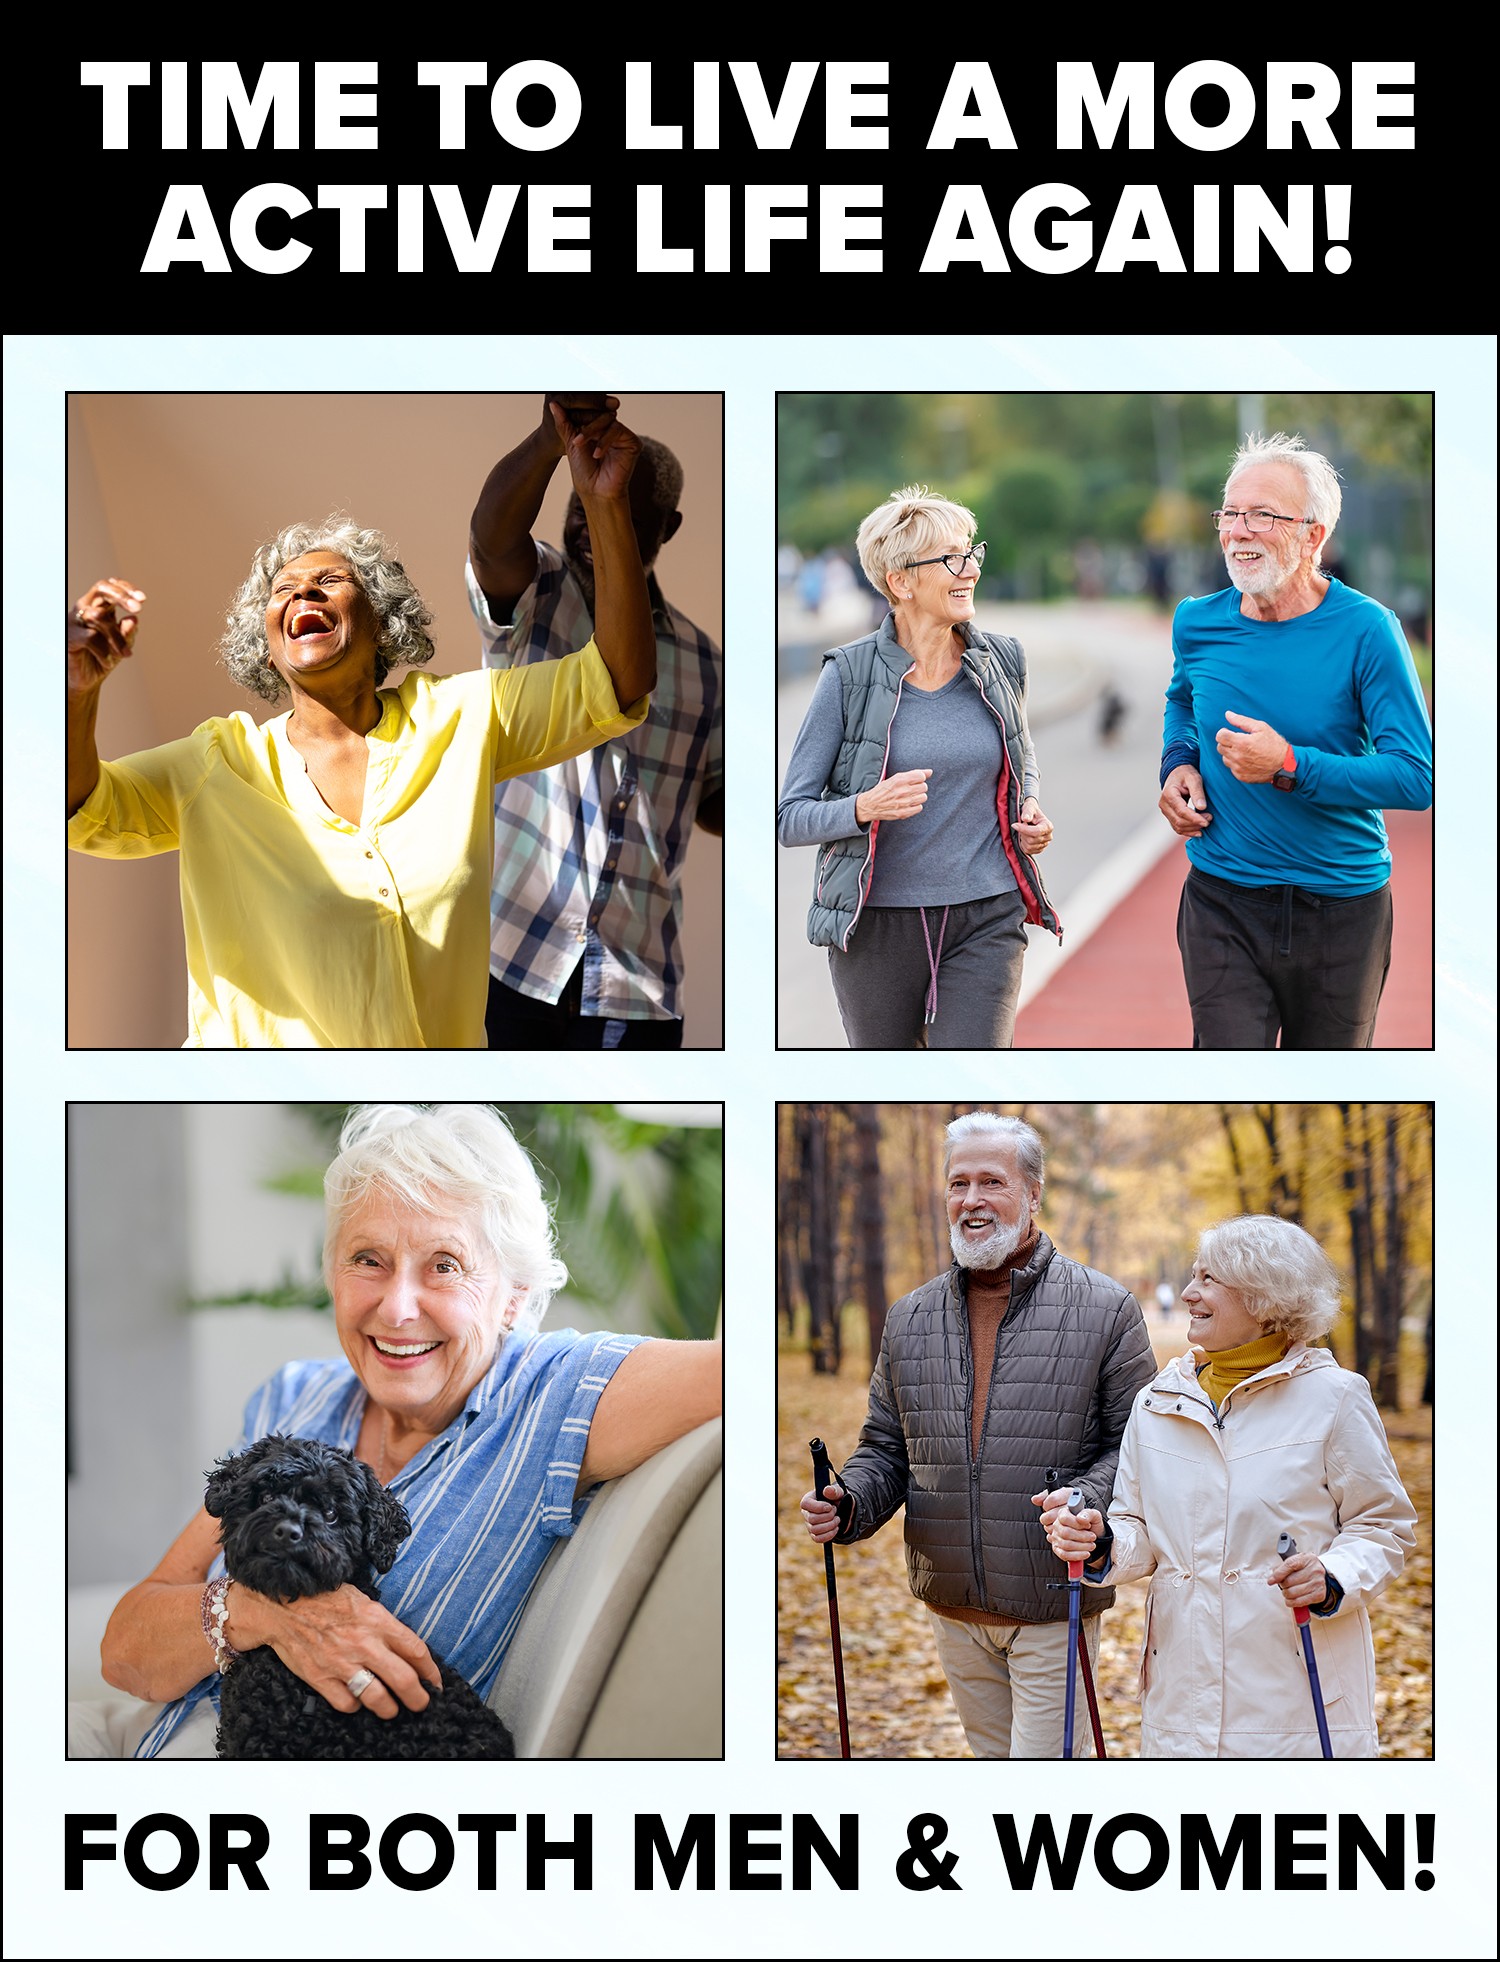 Live a more active life